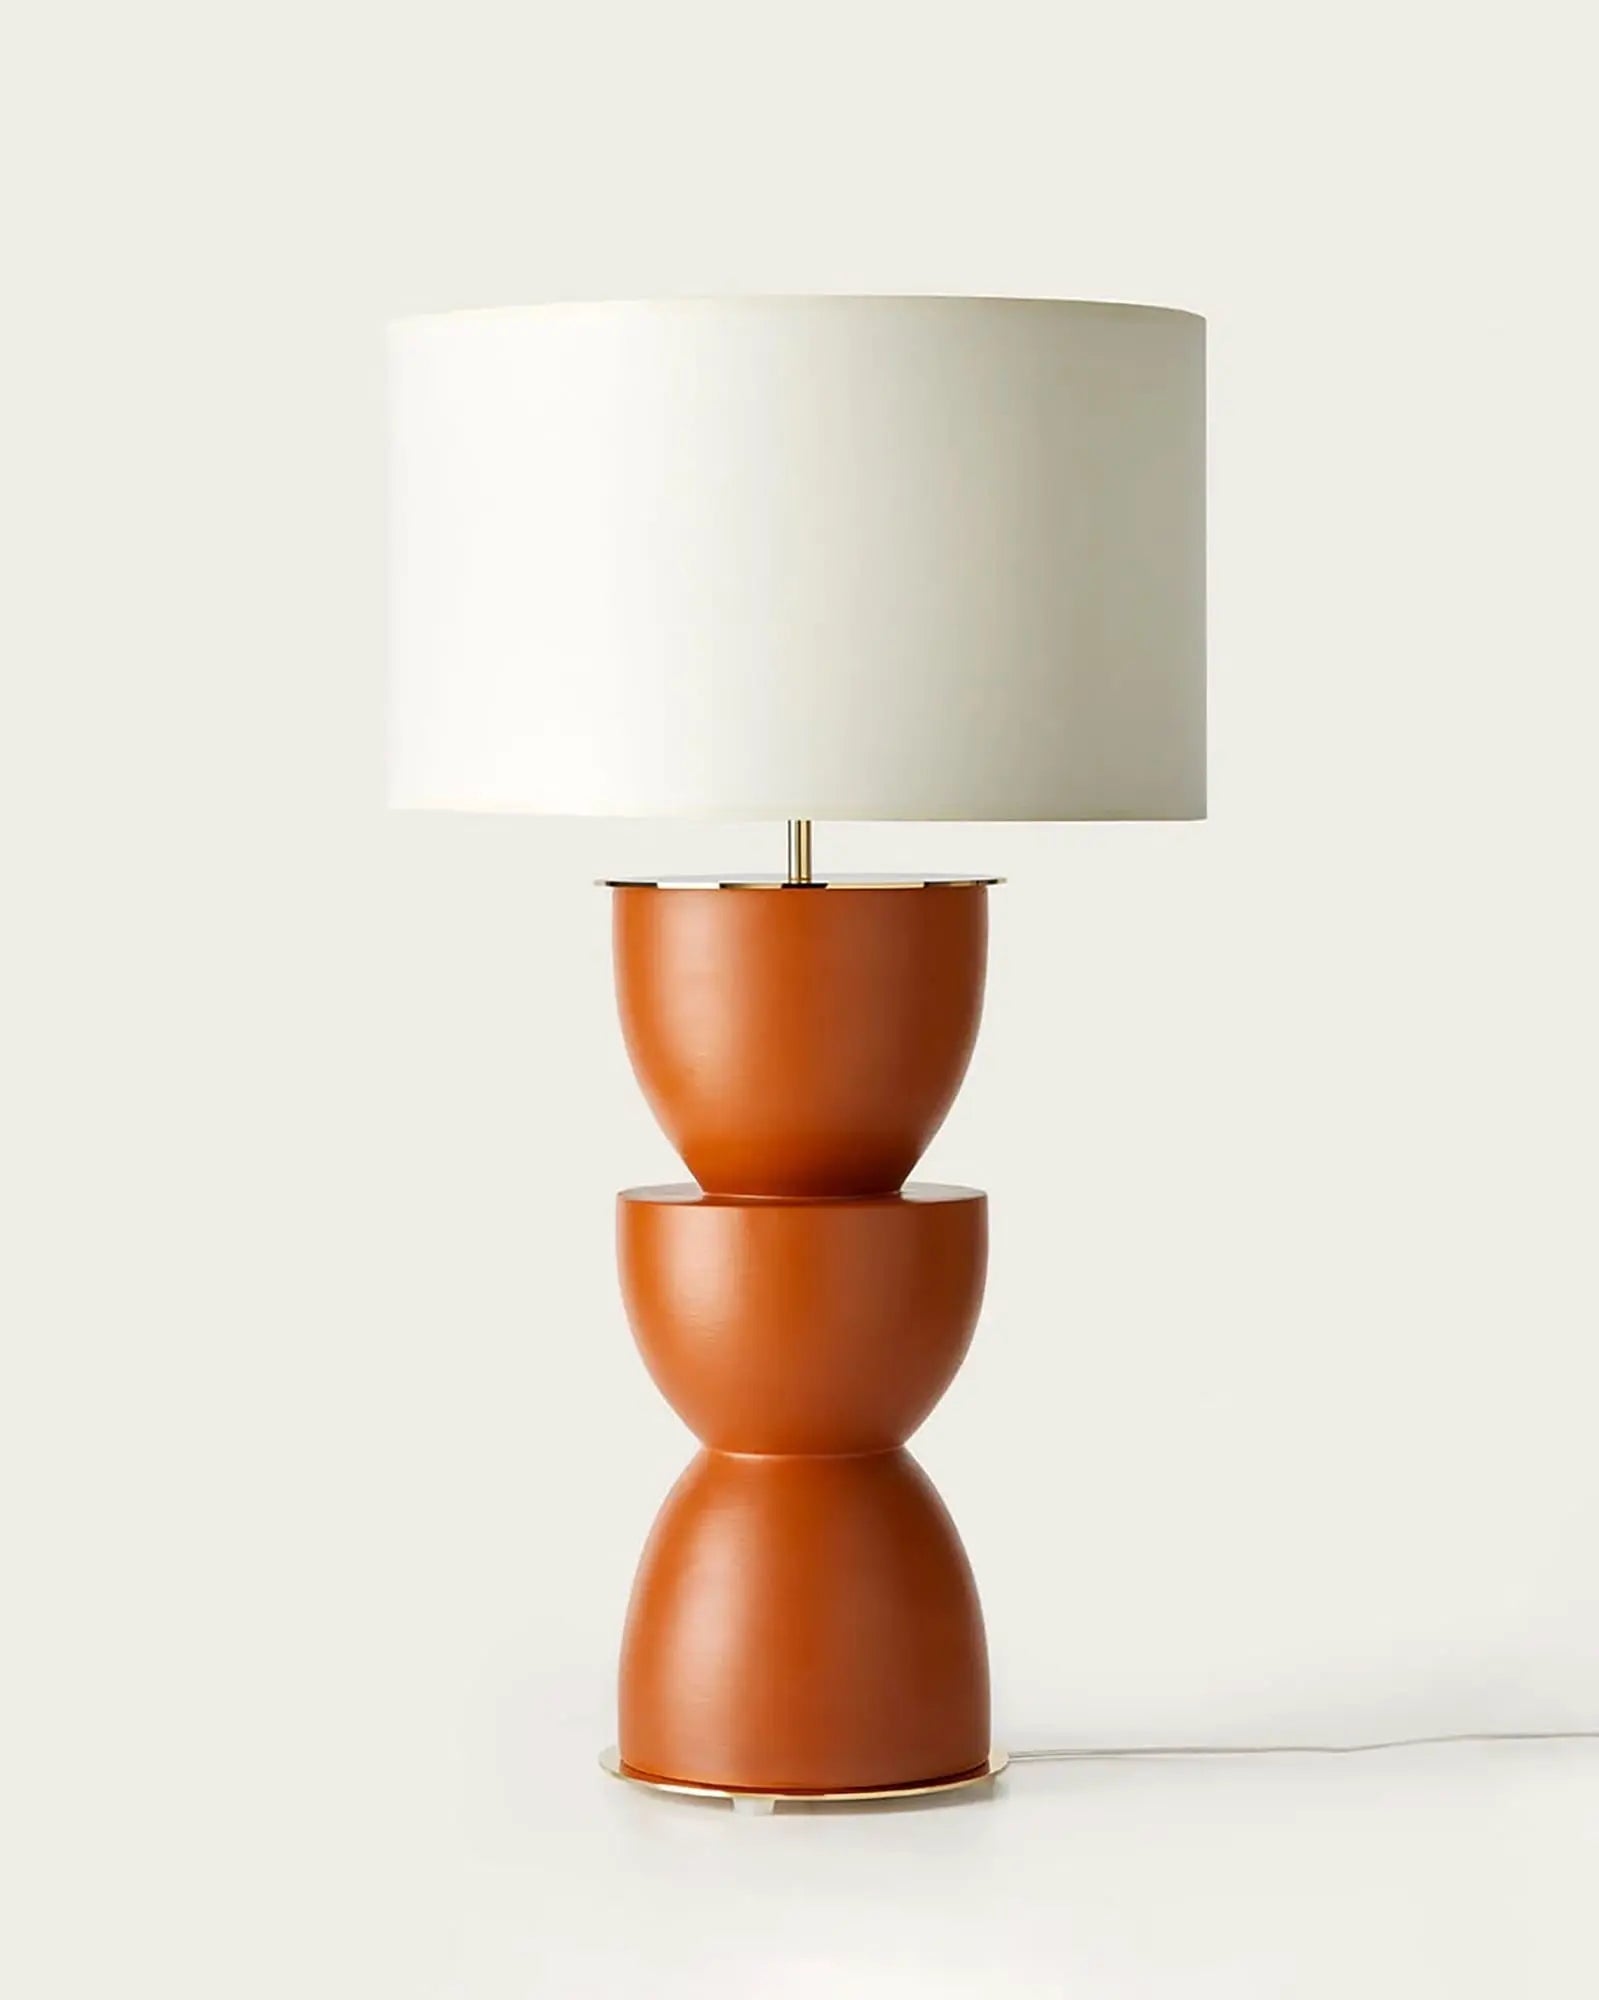 Metric Ceramic and fabric shade decorative table lamp product pohto